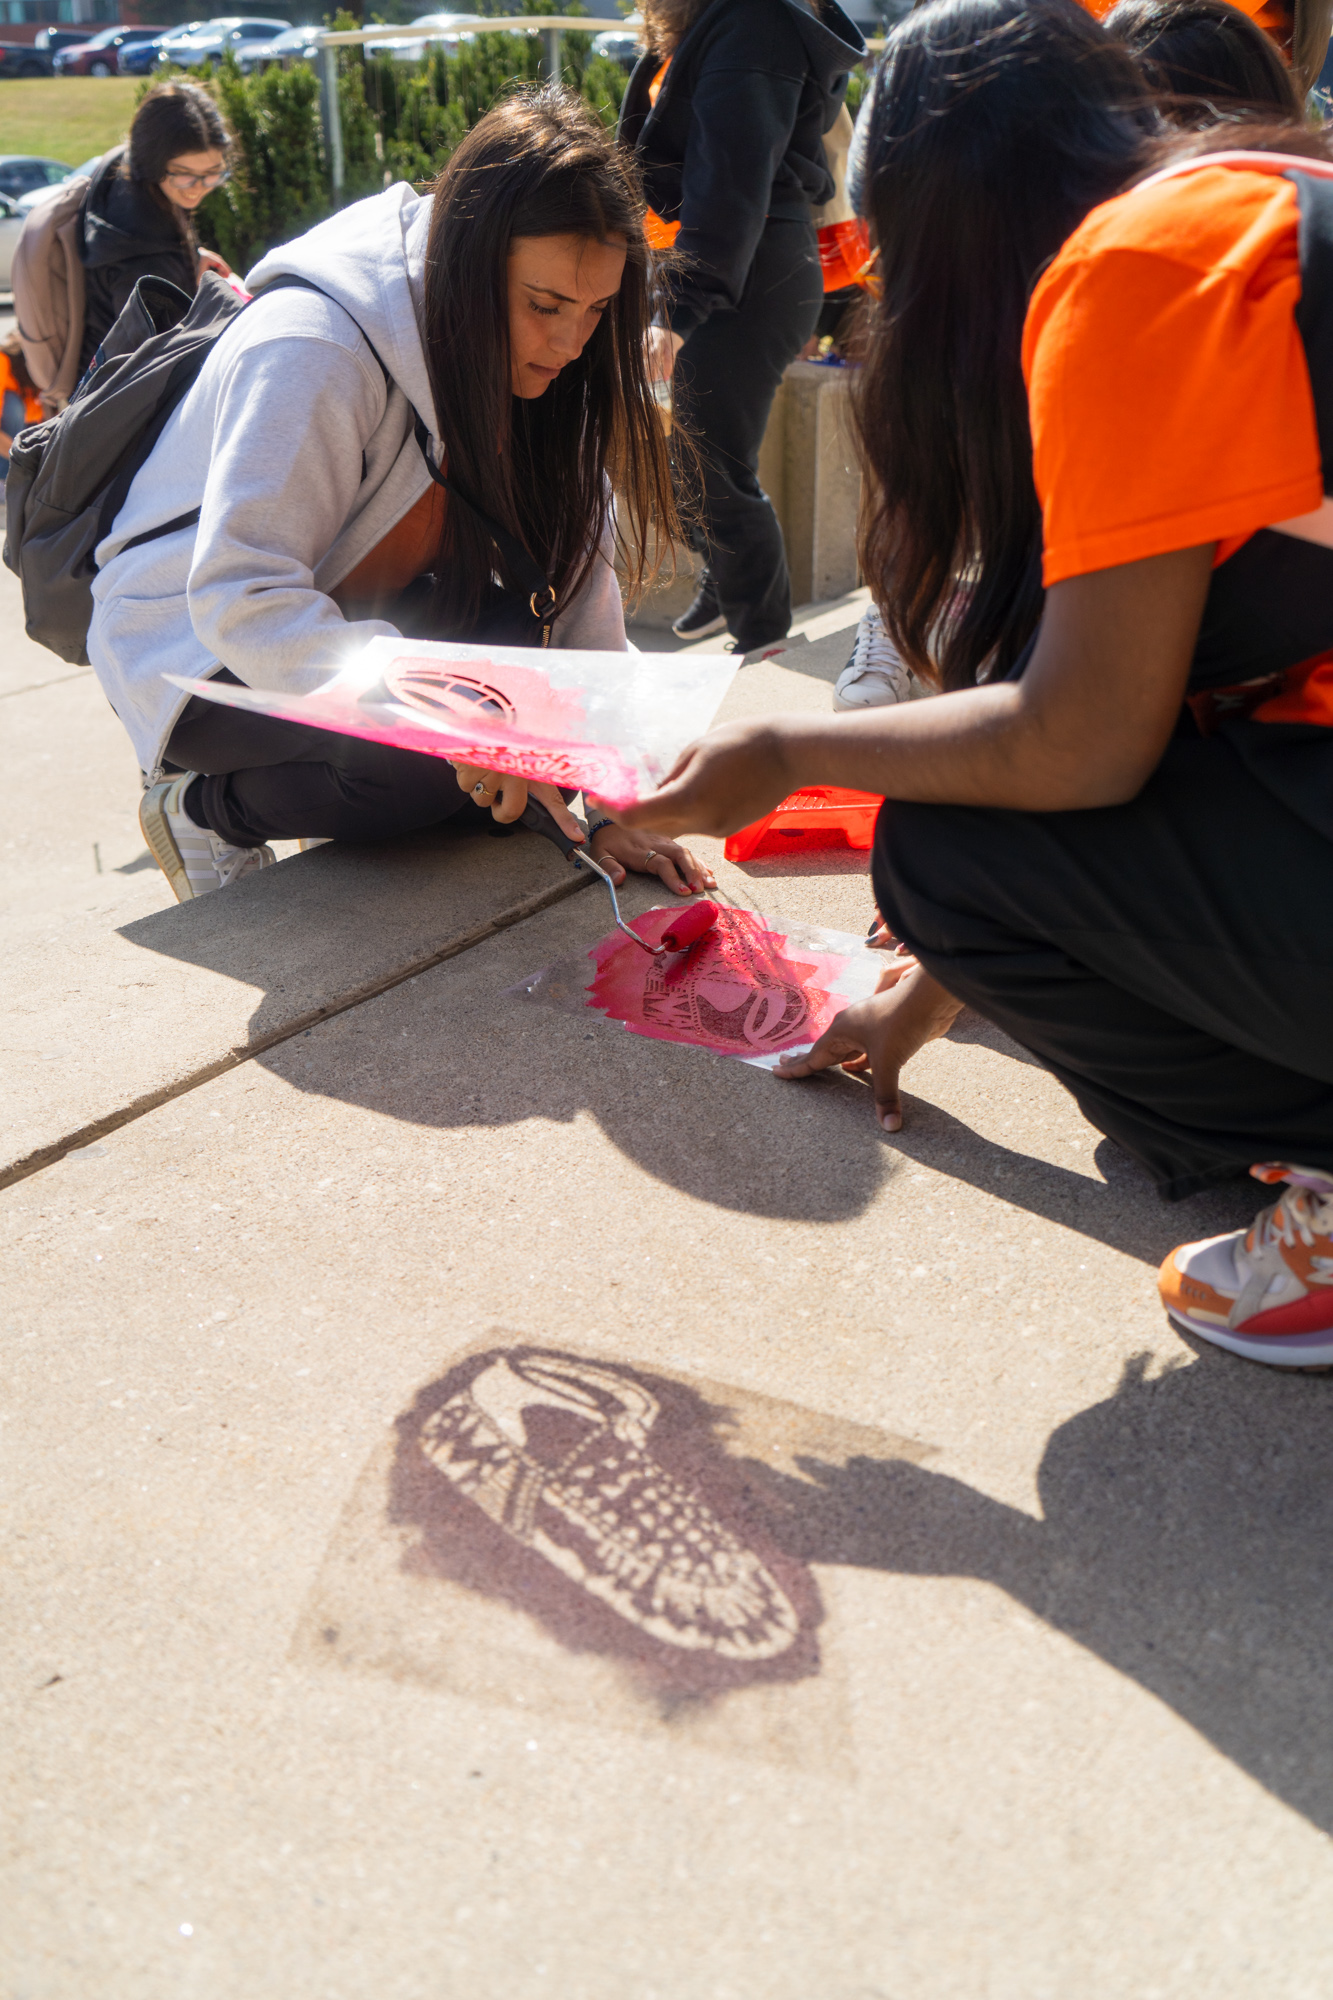 A student holding up a moccasin stencil casts a shadow in the foreground while a another rolls paint onto another stencil